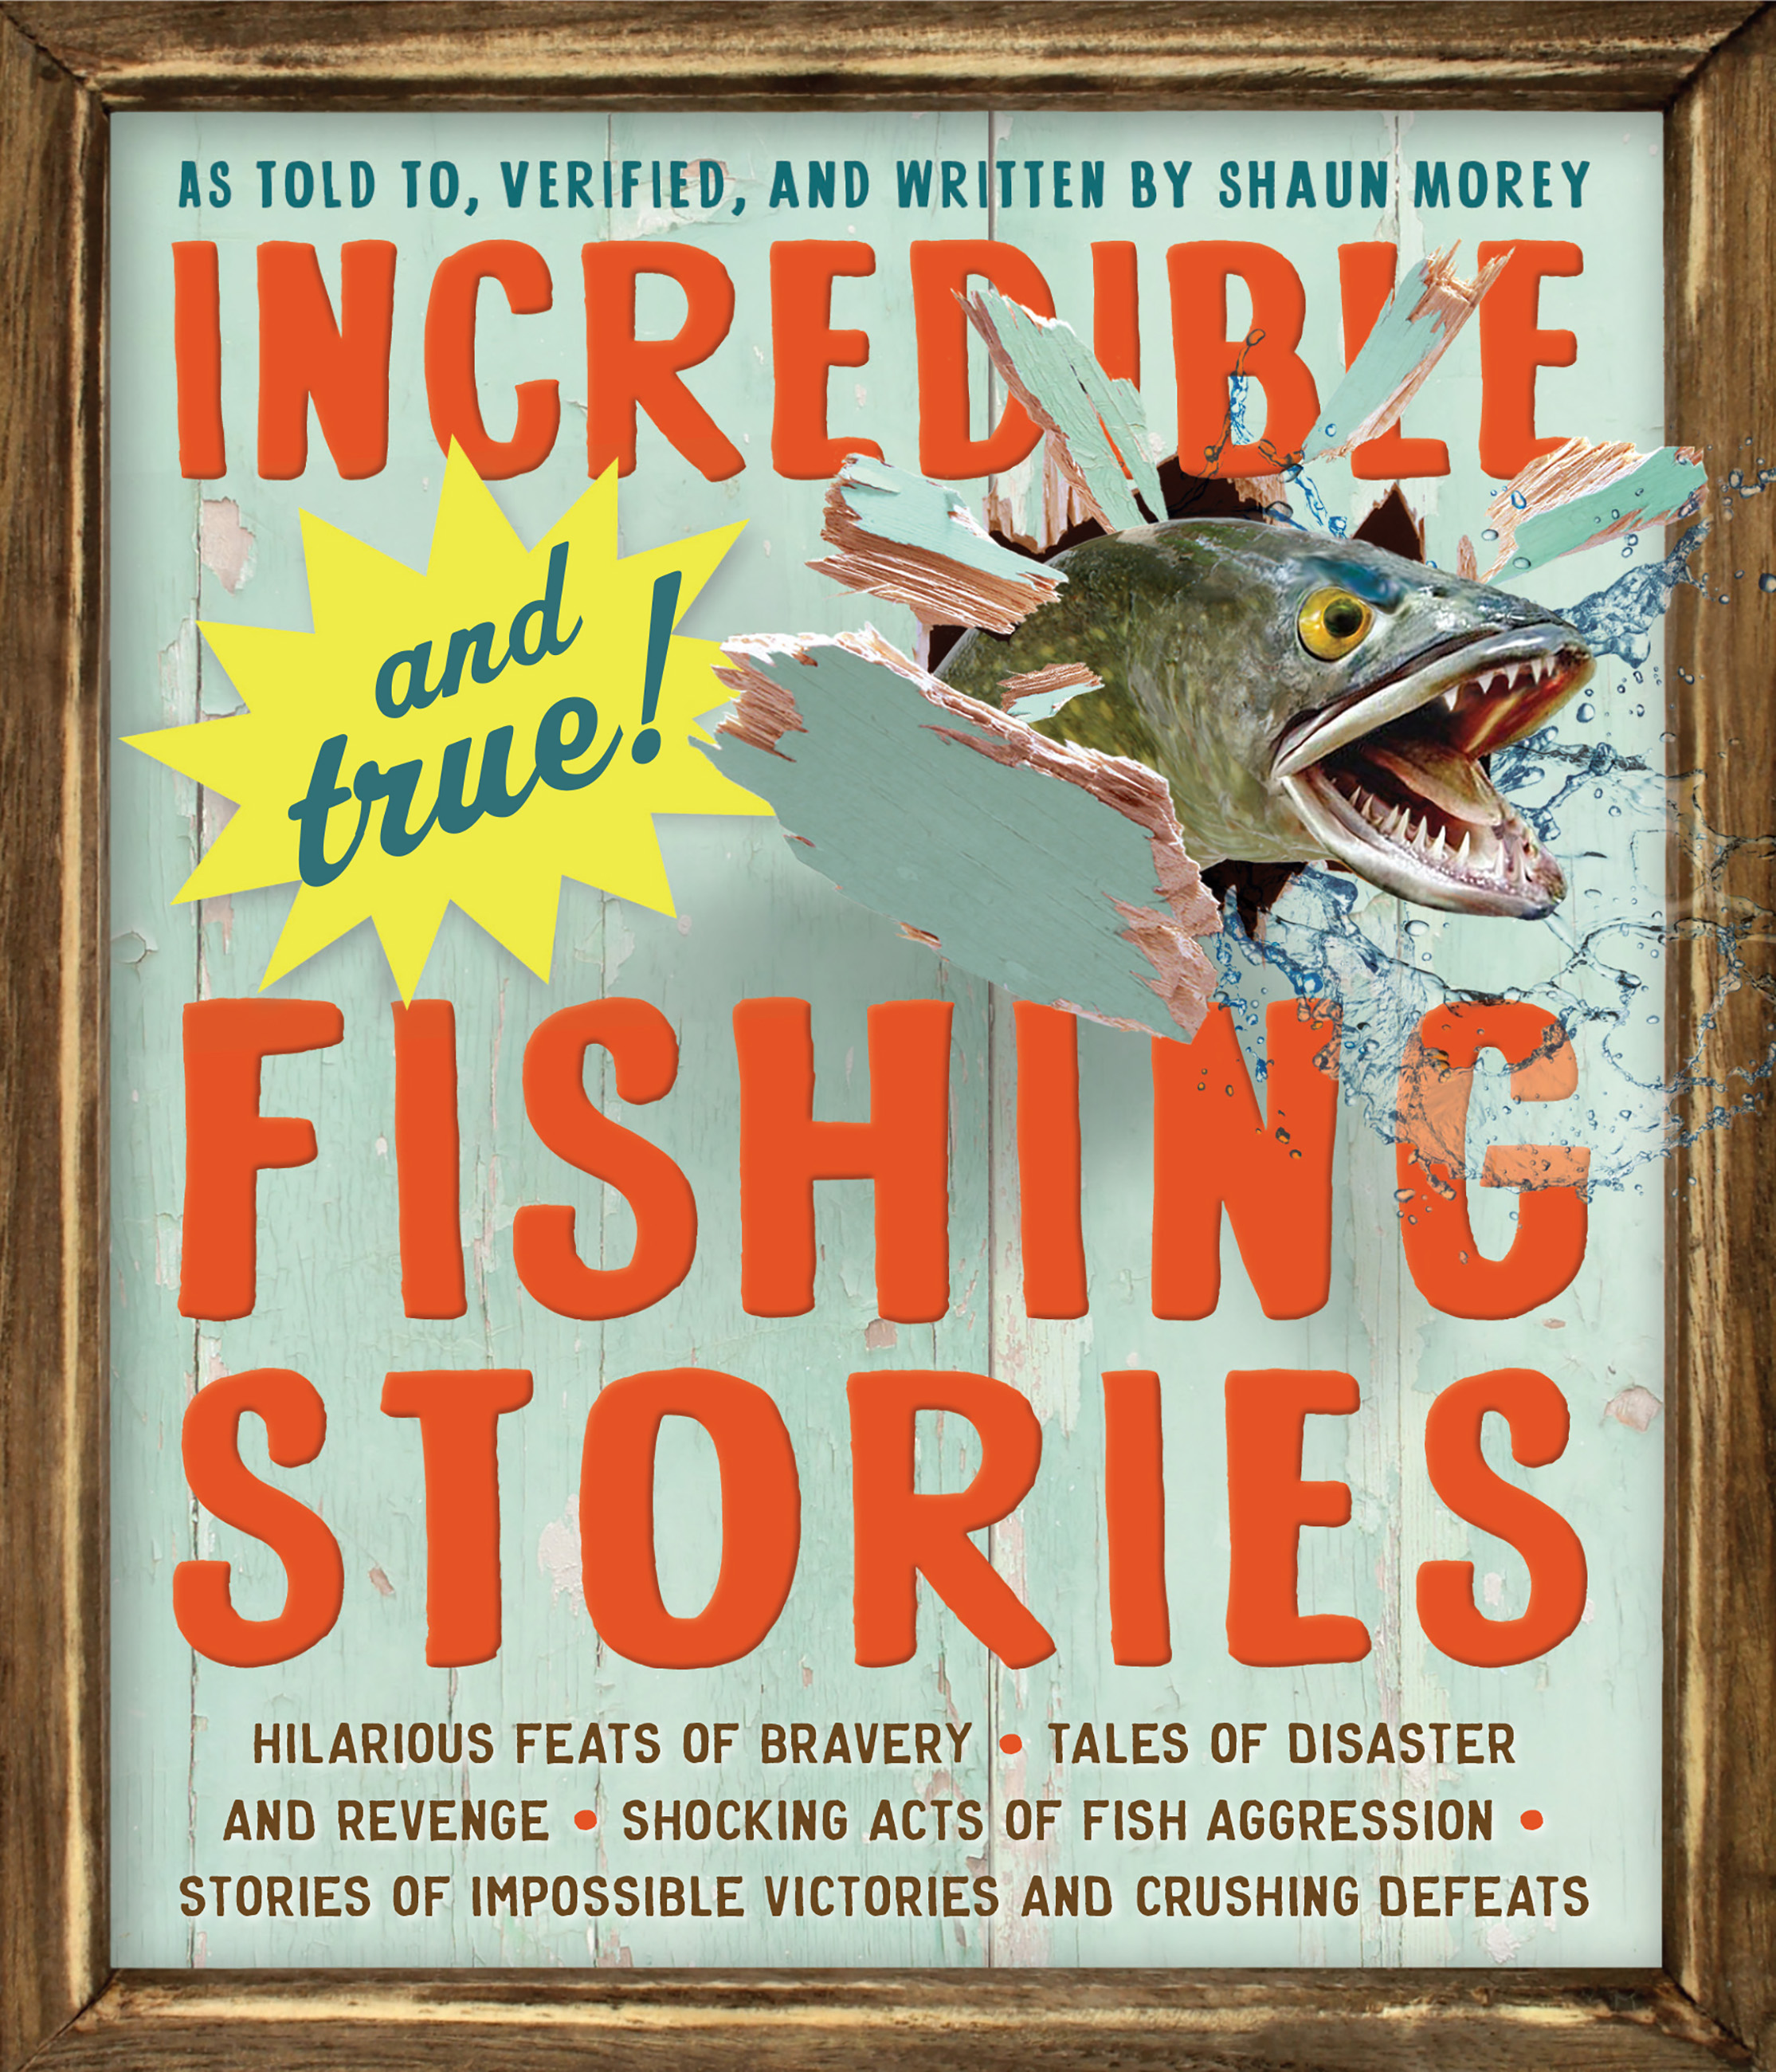 Incredible--and True!--Fishing Stories by Shaun Morey